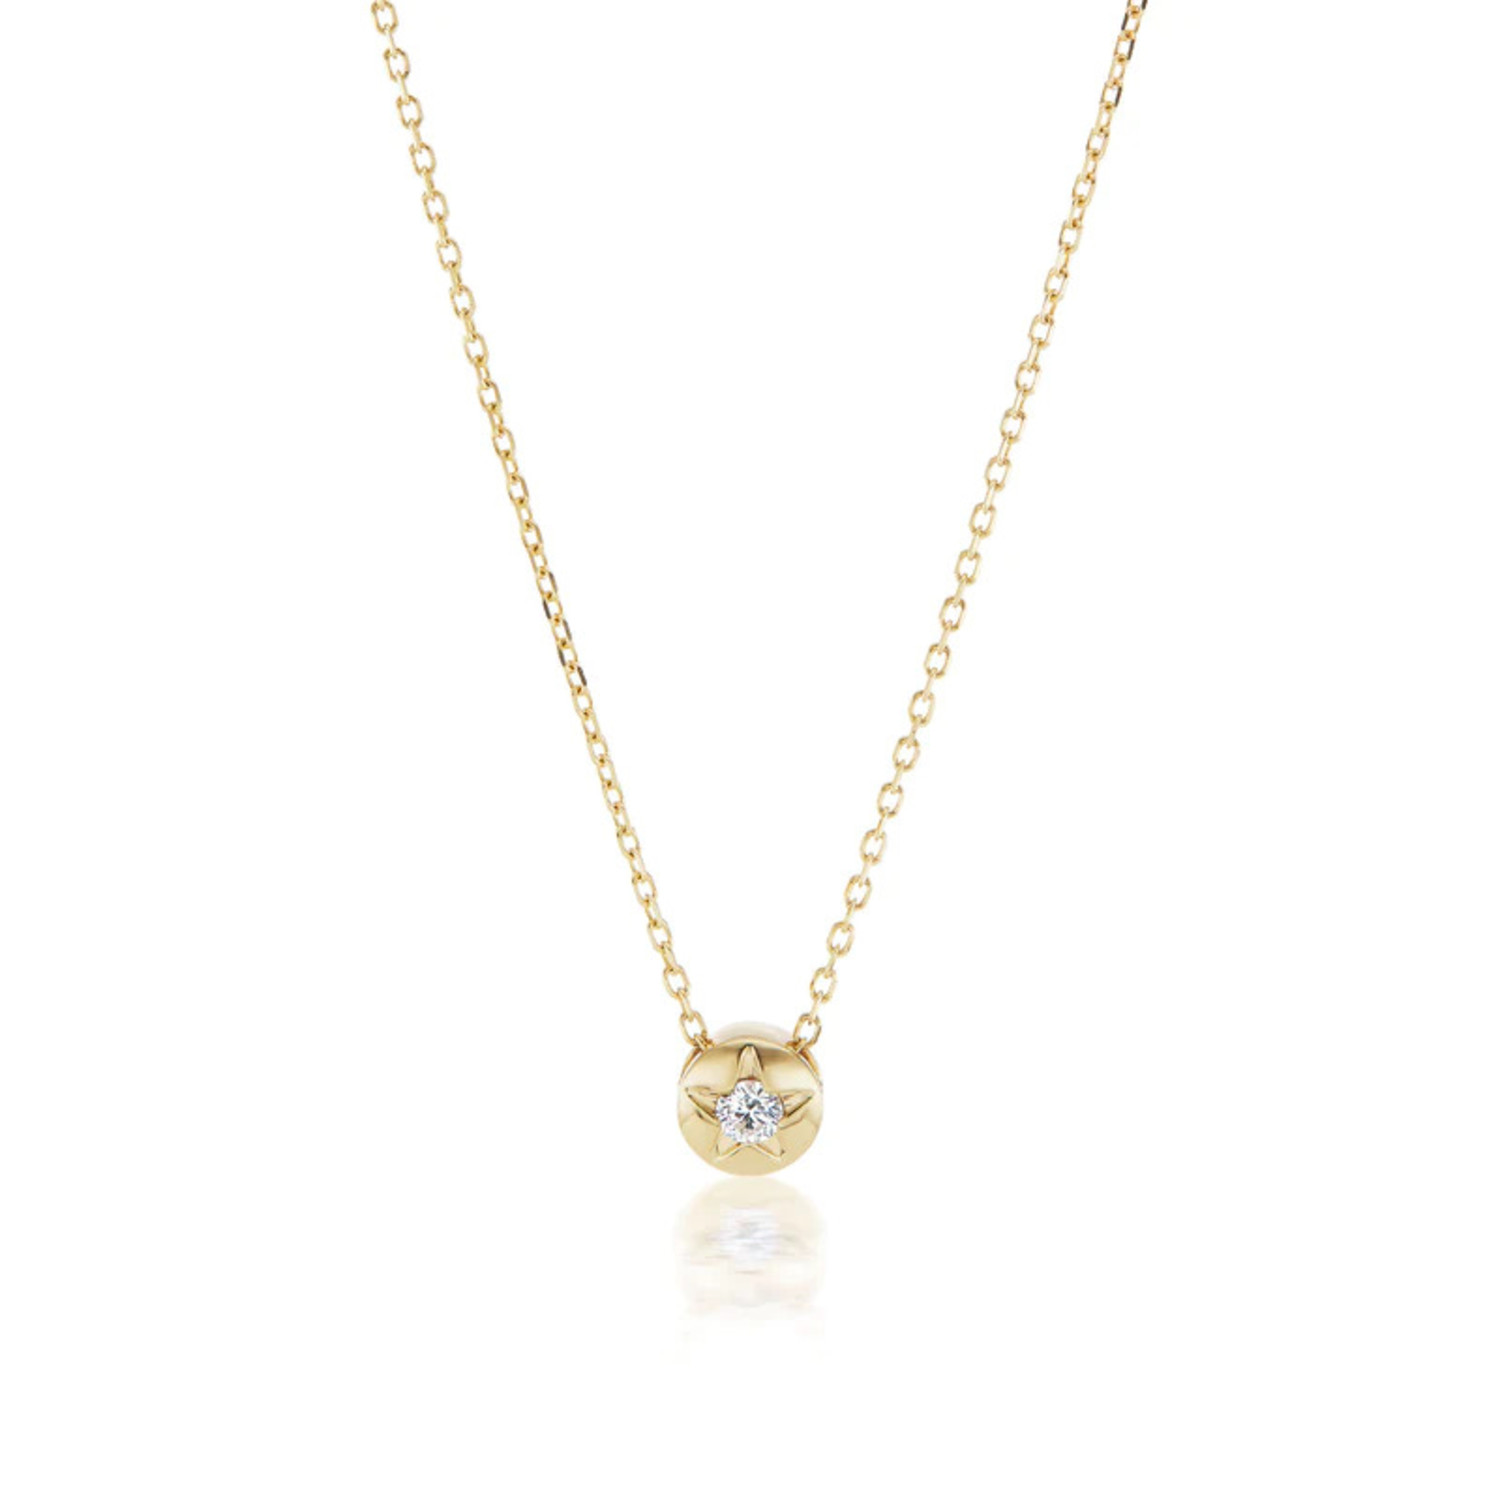 L’imperatrice Star Necklace in 18K Yellow Gold